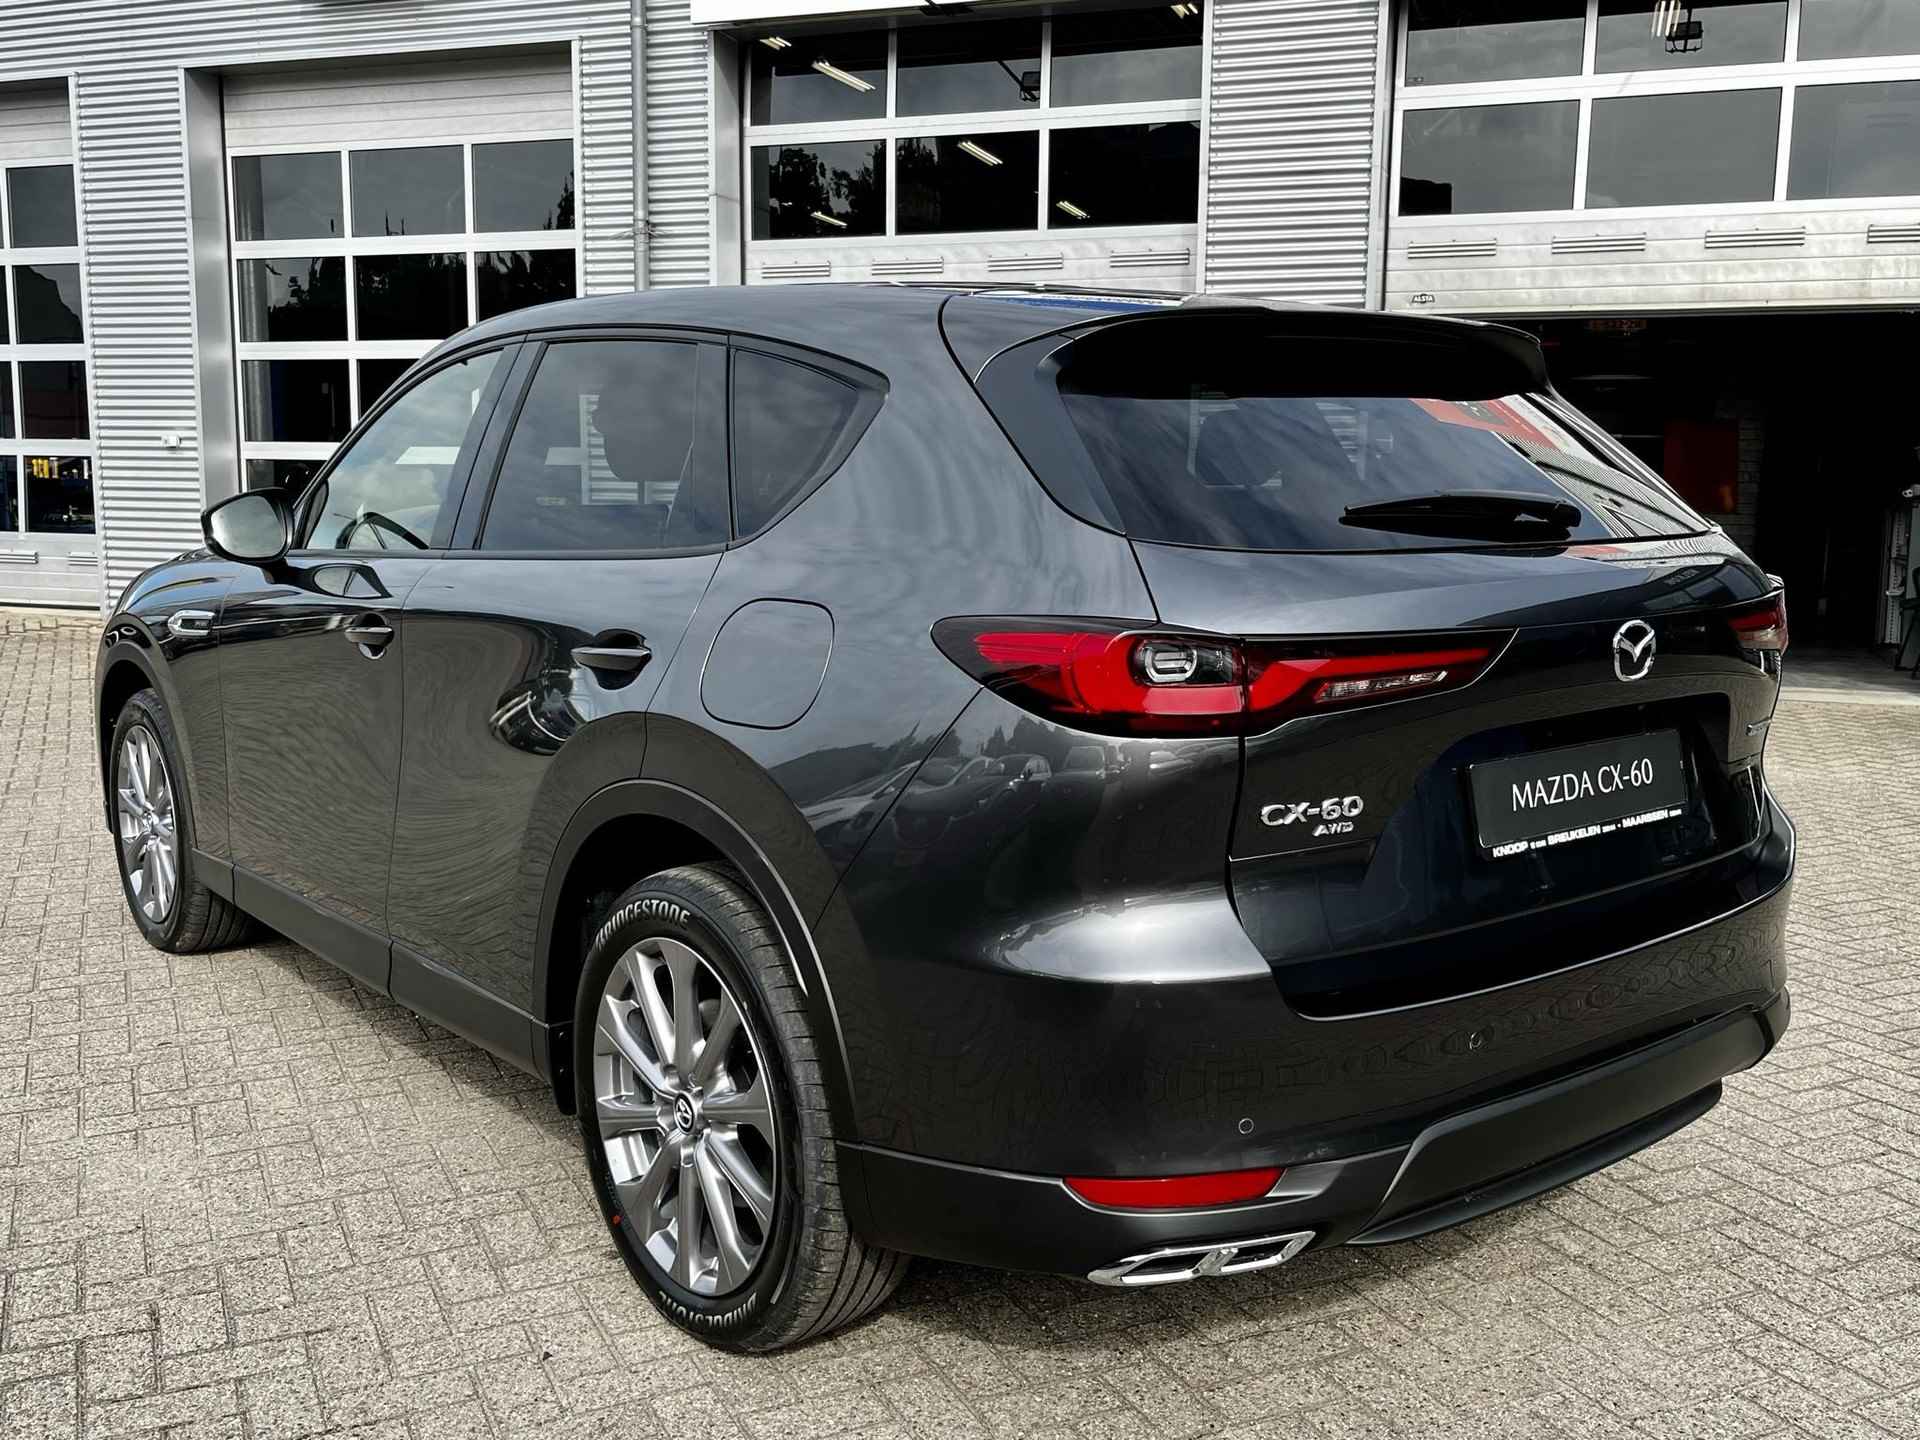 Mazda CX-60 2.5 e-SkyActiv PHEV Exclusive-Line + Convenience & Sound pack + Driver Assistance Pack - 4/43